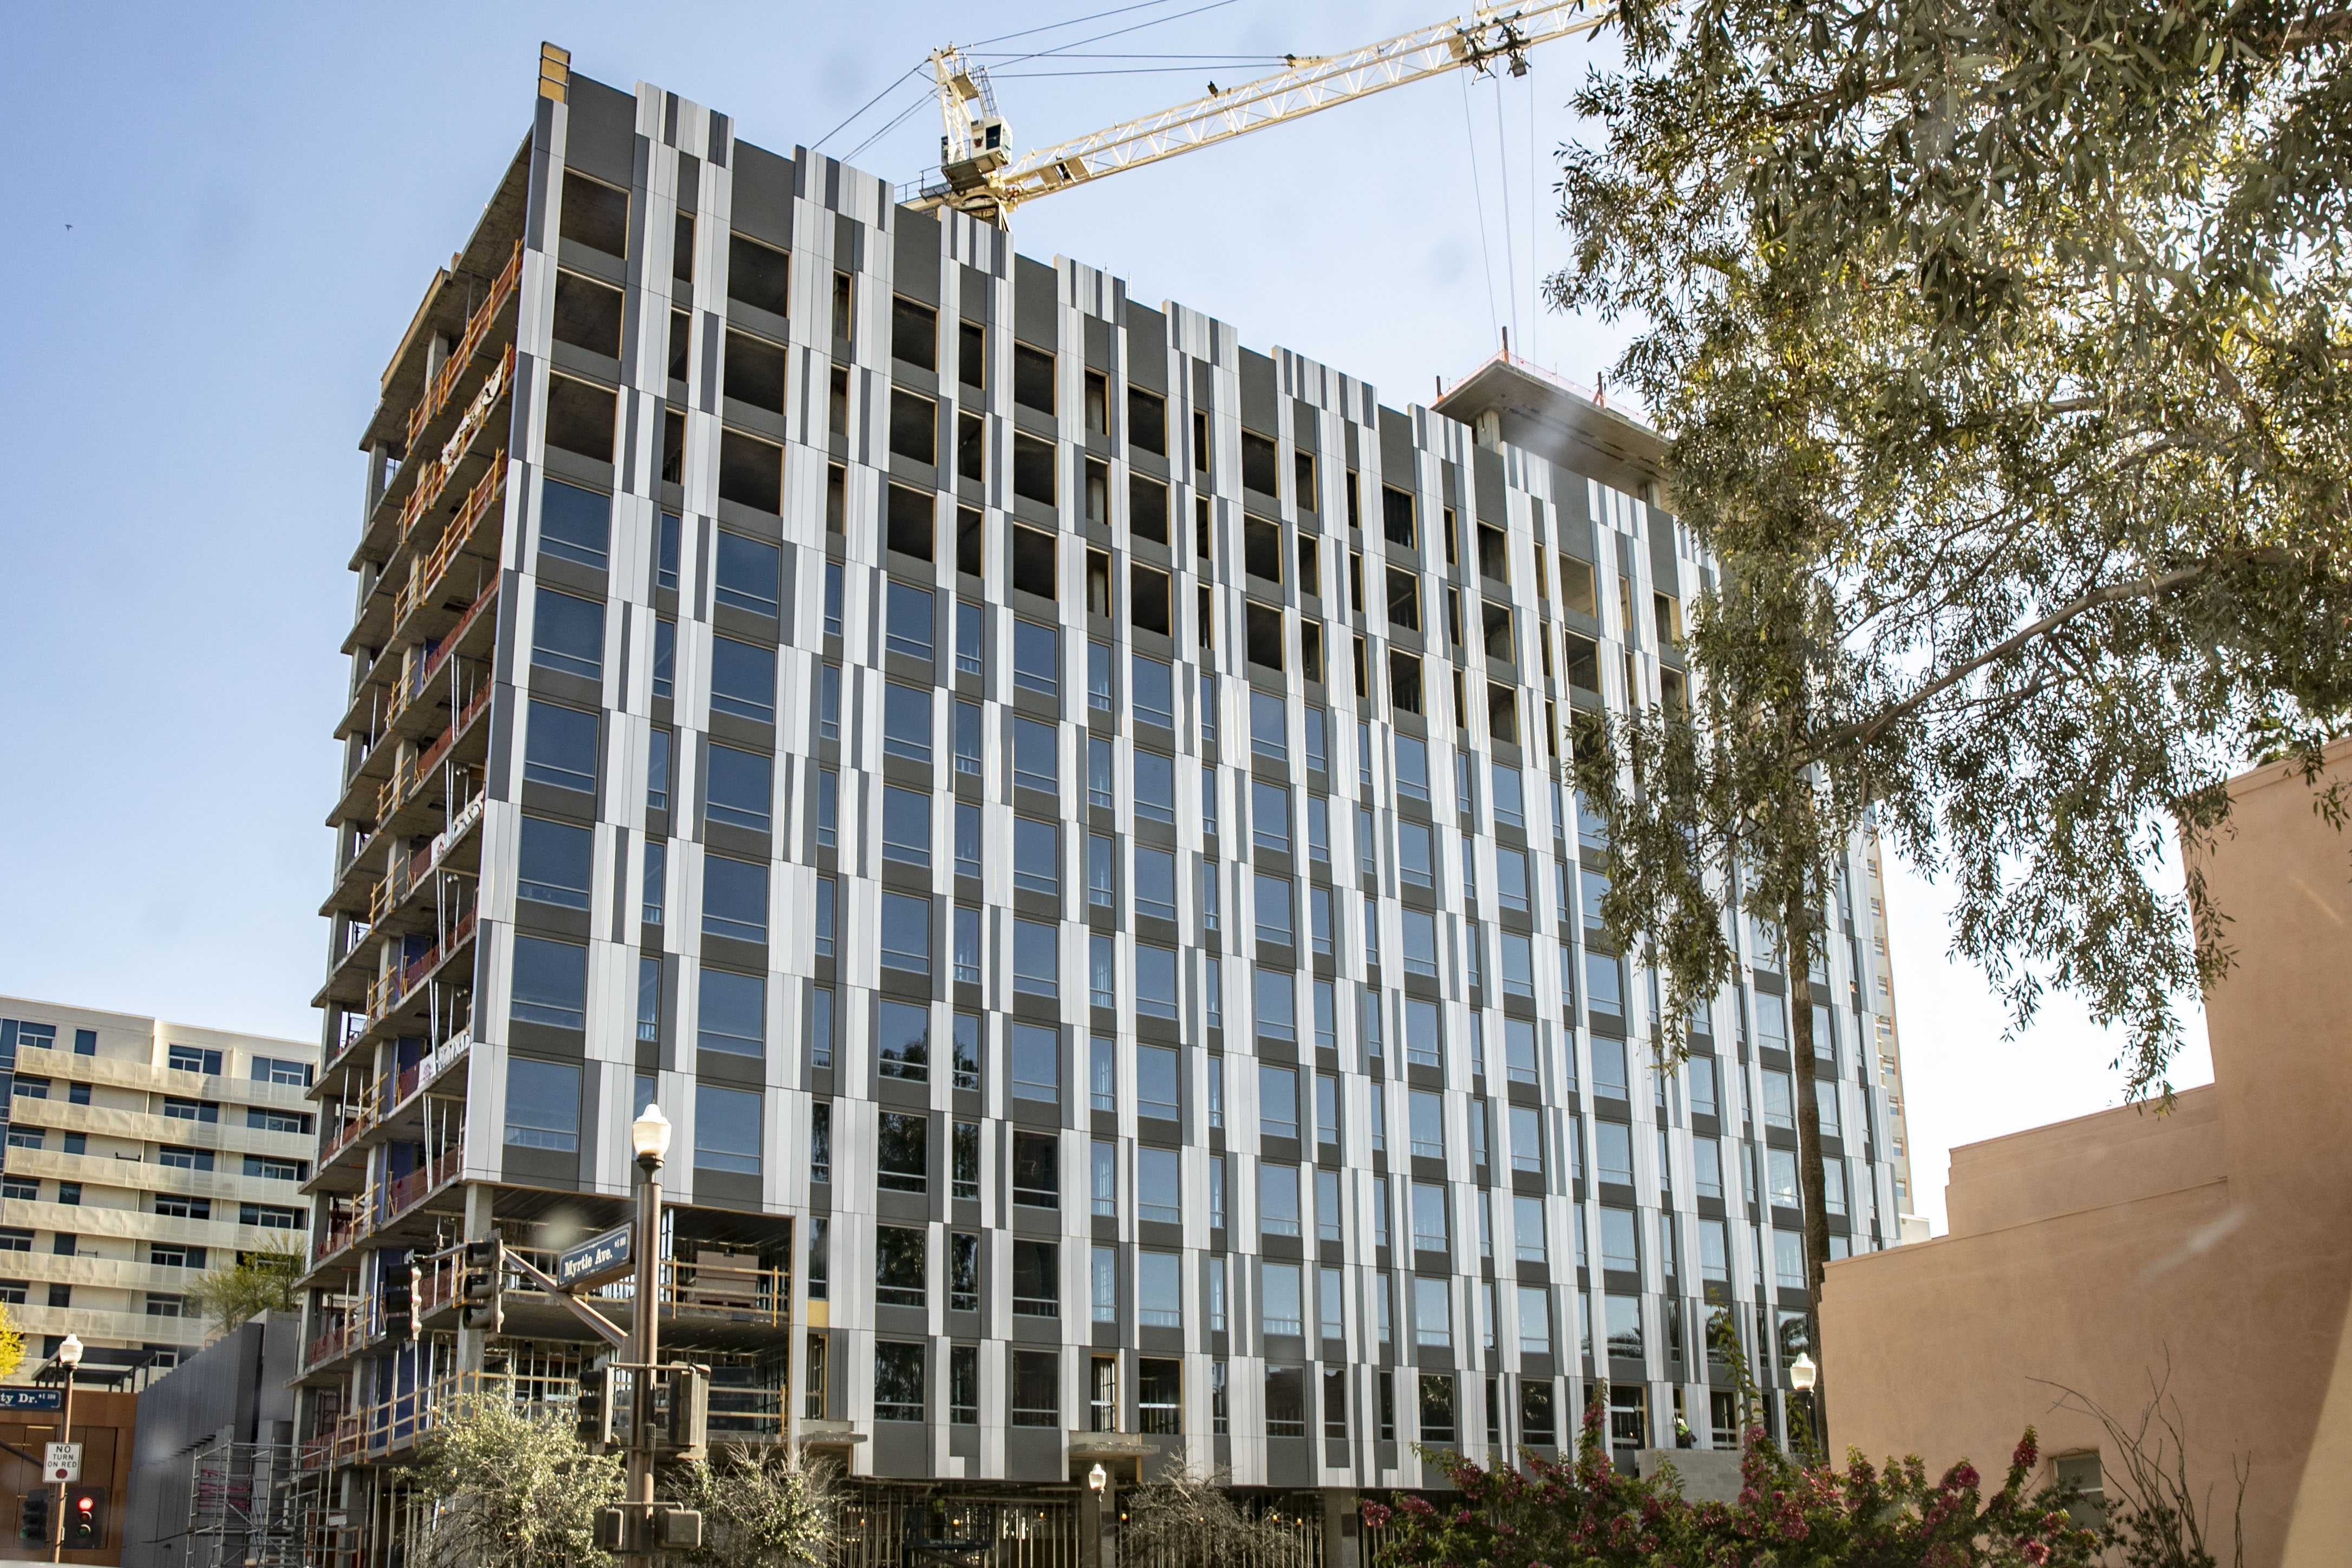 The Canopy by Hilton Tempe's south elevation panel installation is now complete, with windows installed up through level 10 and remaining windows on Levels 11 to 13 scheduled to complete next week.